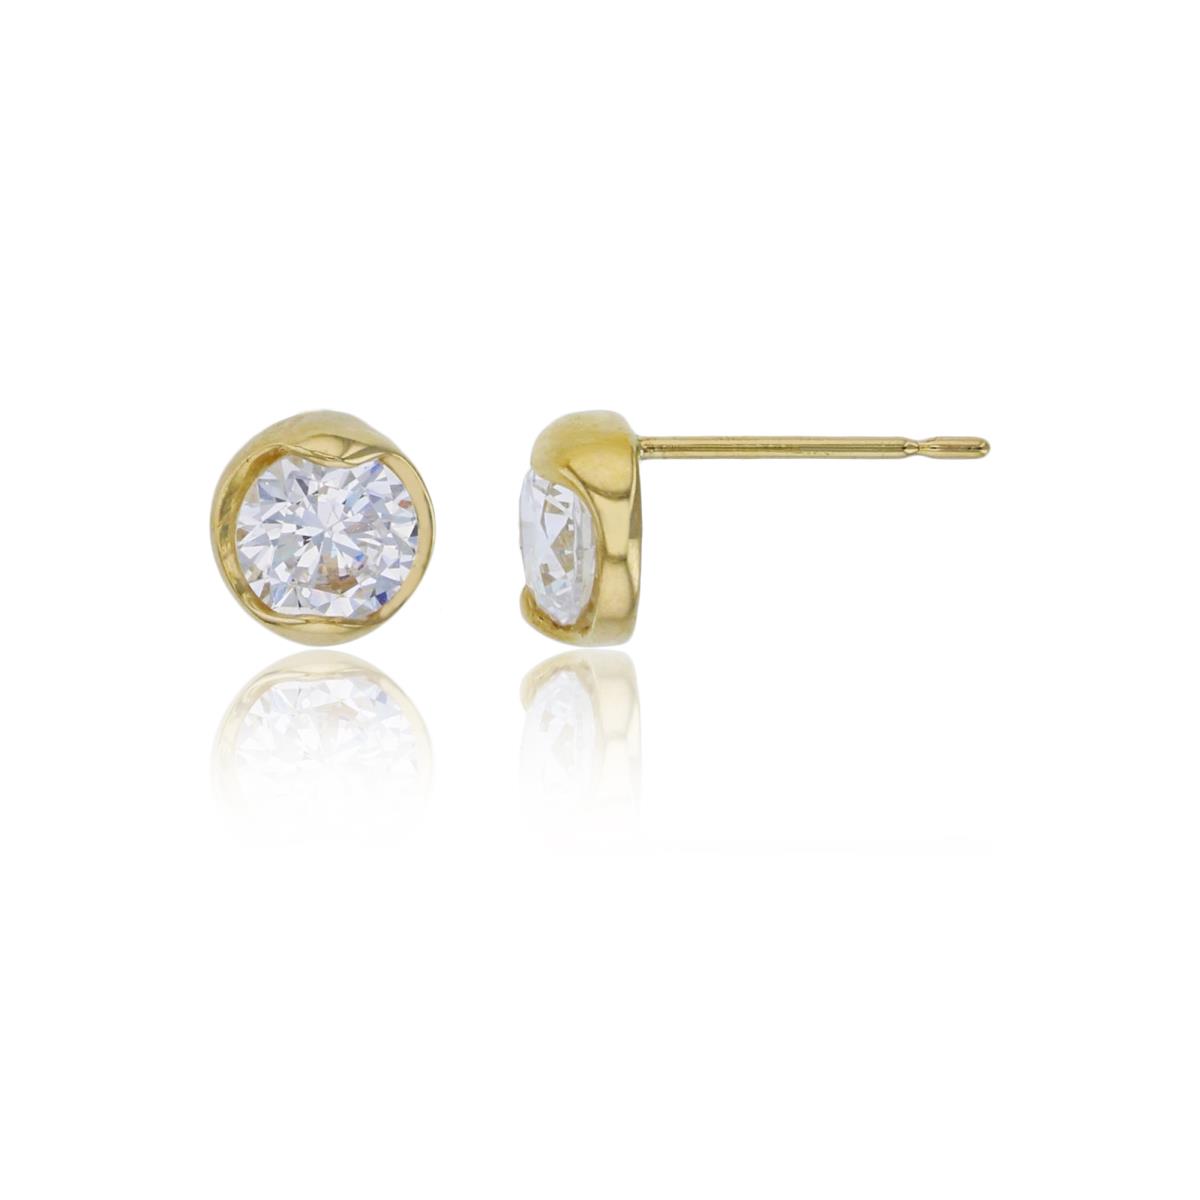 14K Yellow Gold 5mm Round Cut Solitaire Stud Earring